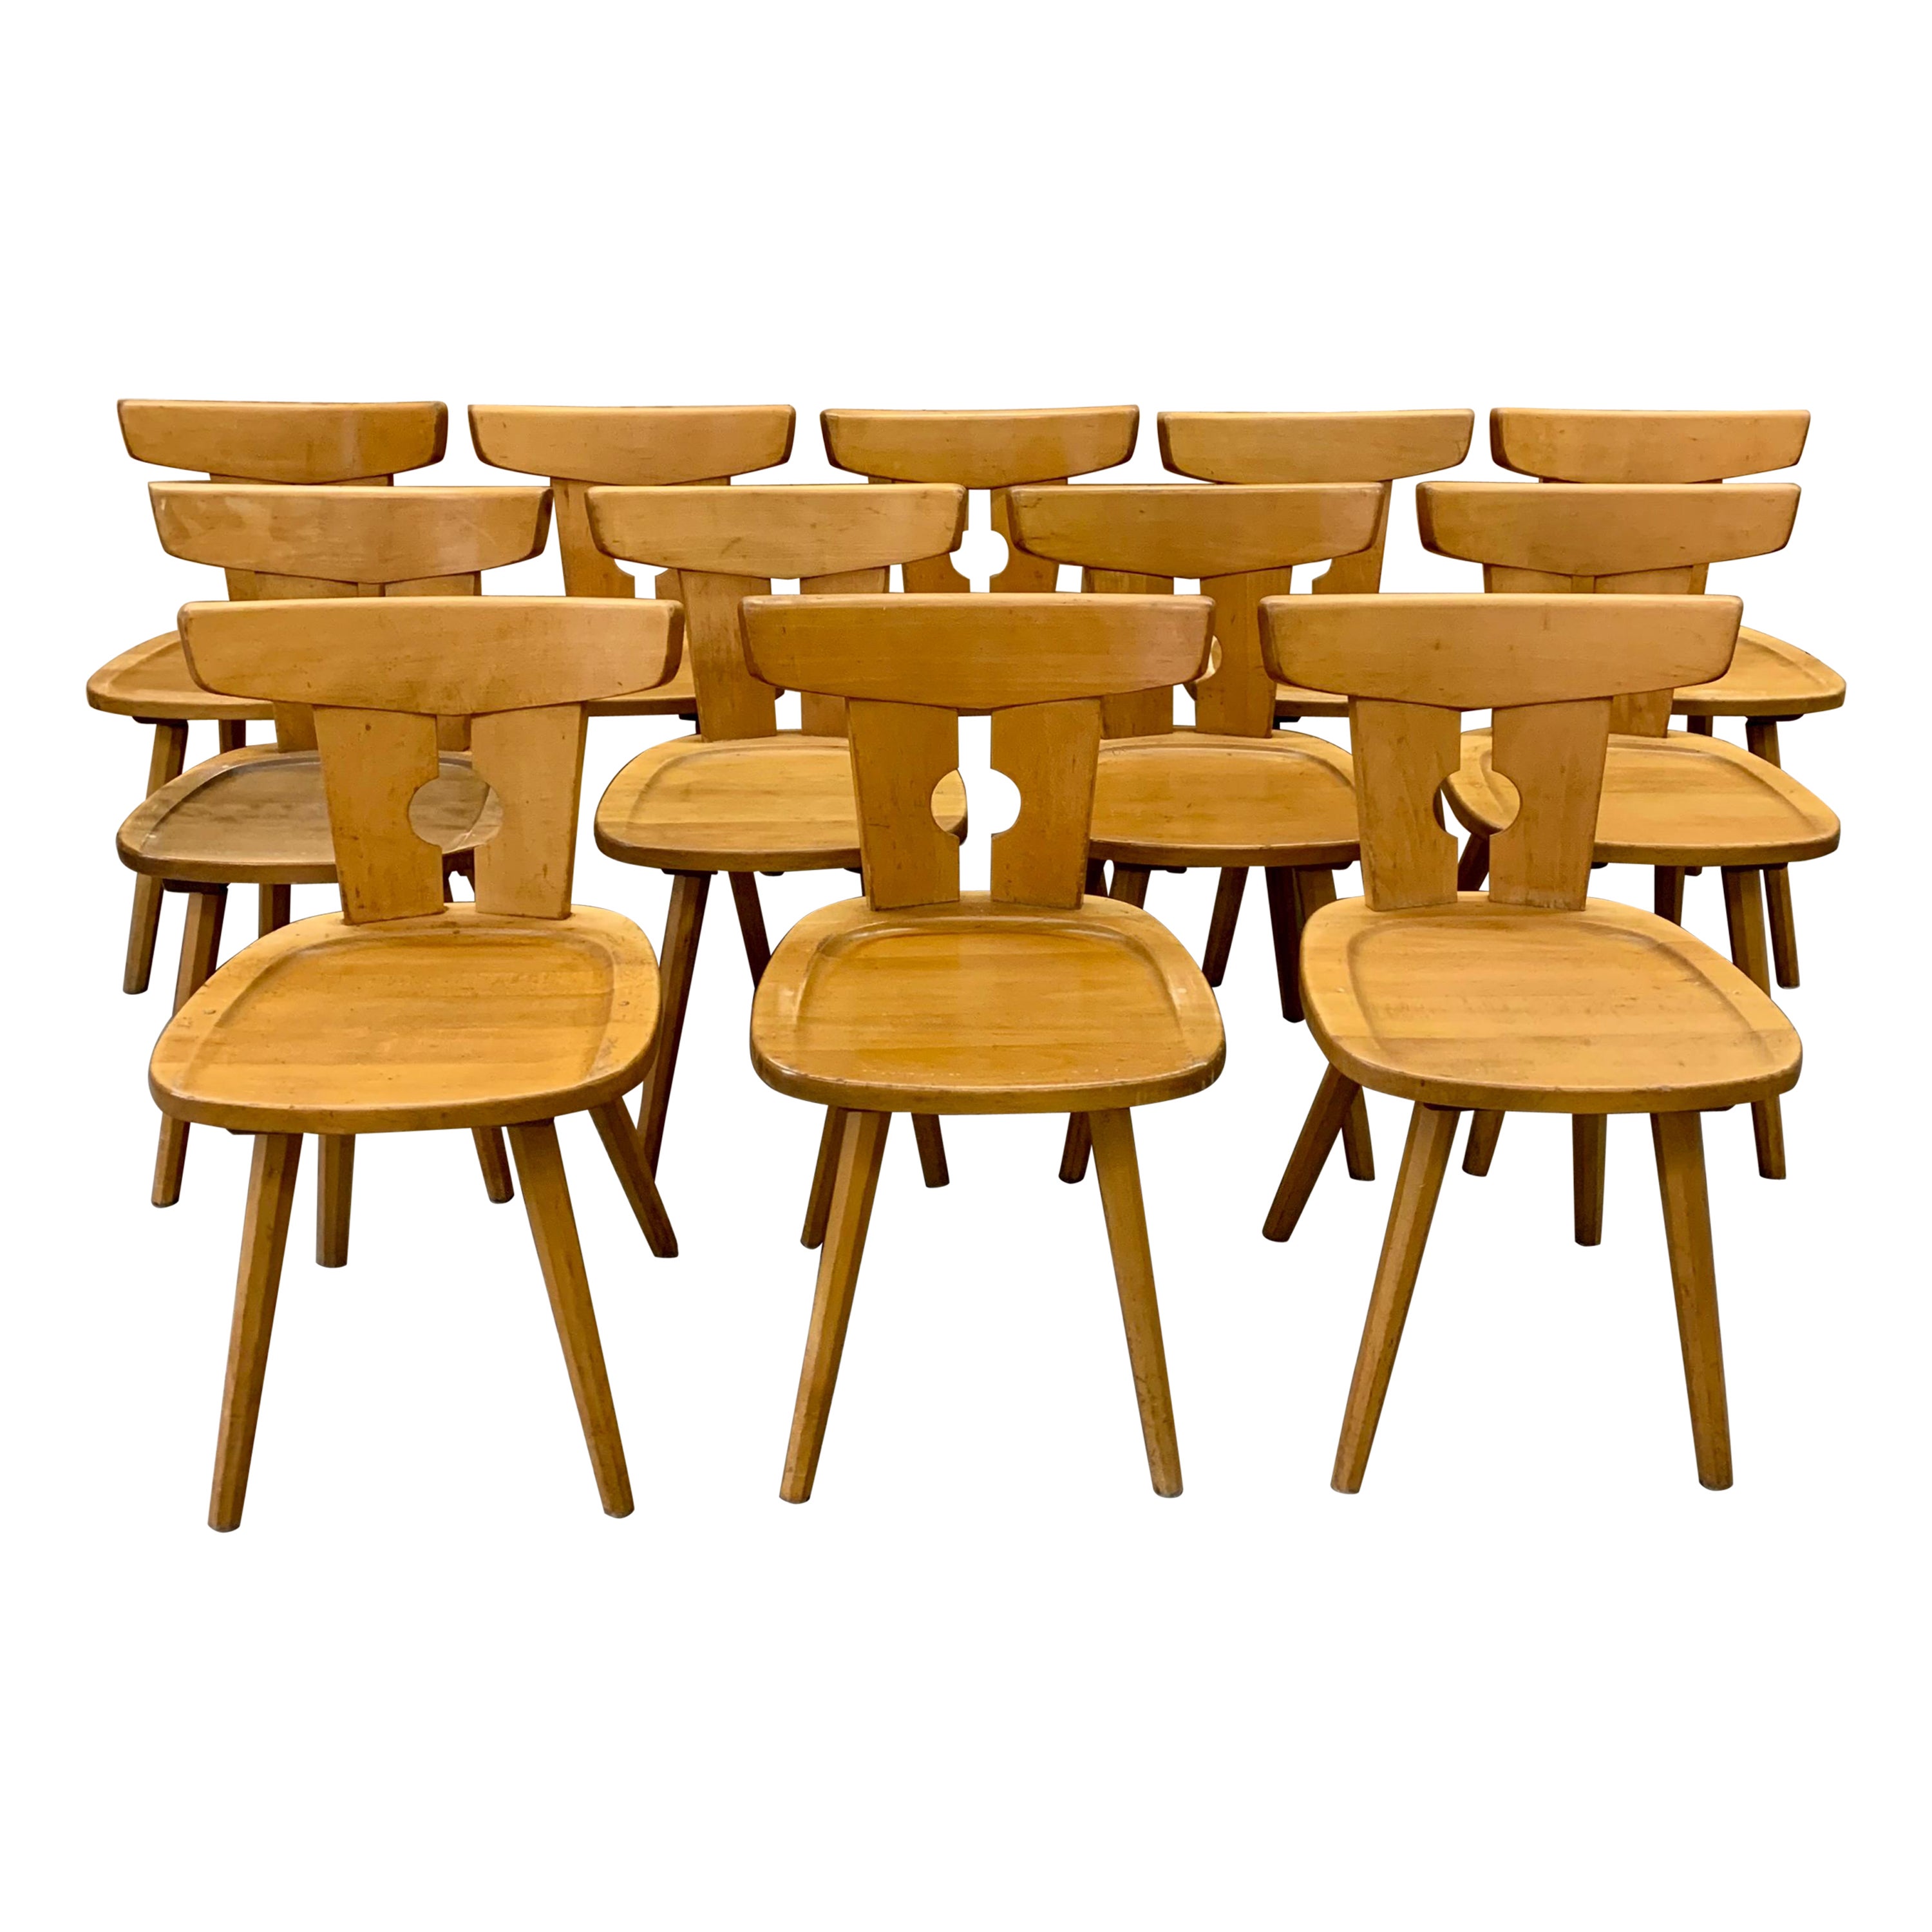 Vintage Beech Chalet Chairs For Sale